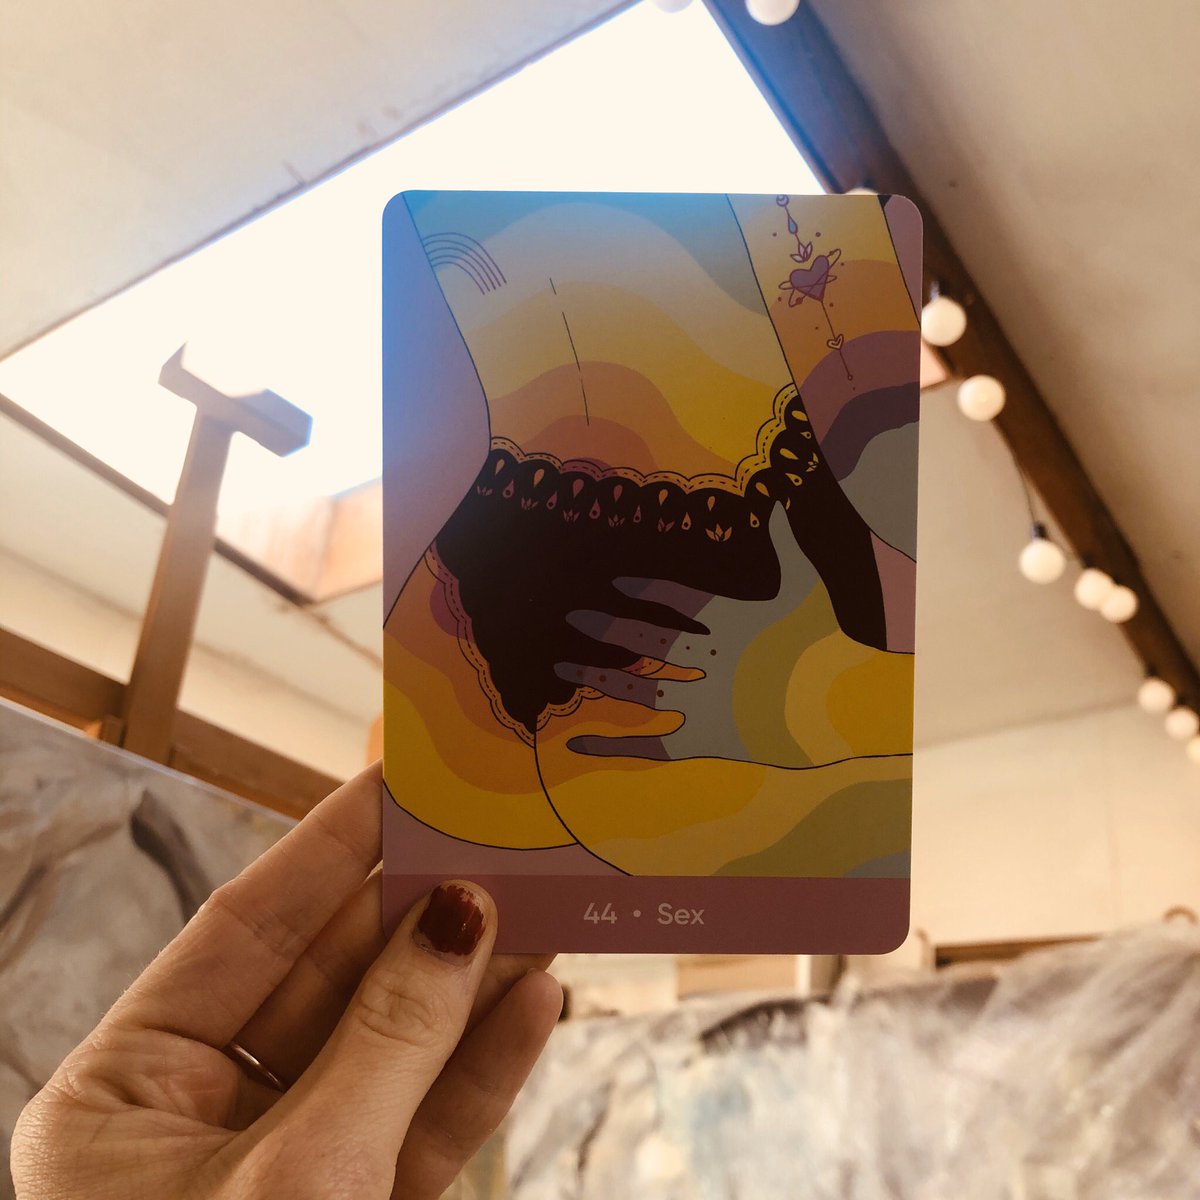  your self care advice card!  let go and enjoy yourself! Don’t be so caught up in the stresses of life that you forget to slow down and be intimate with the one you love